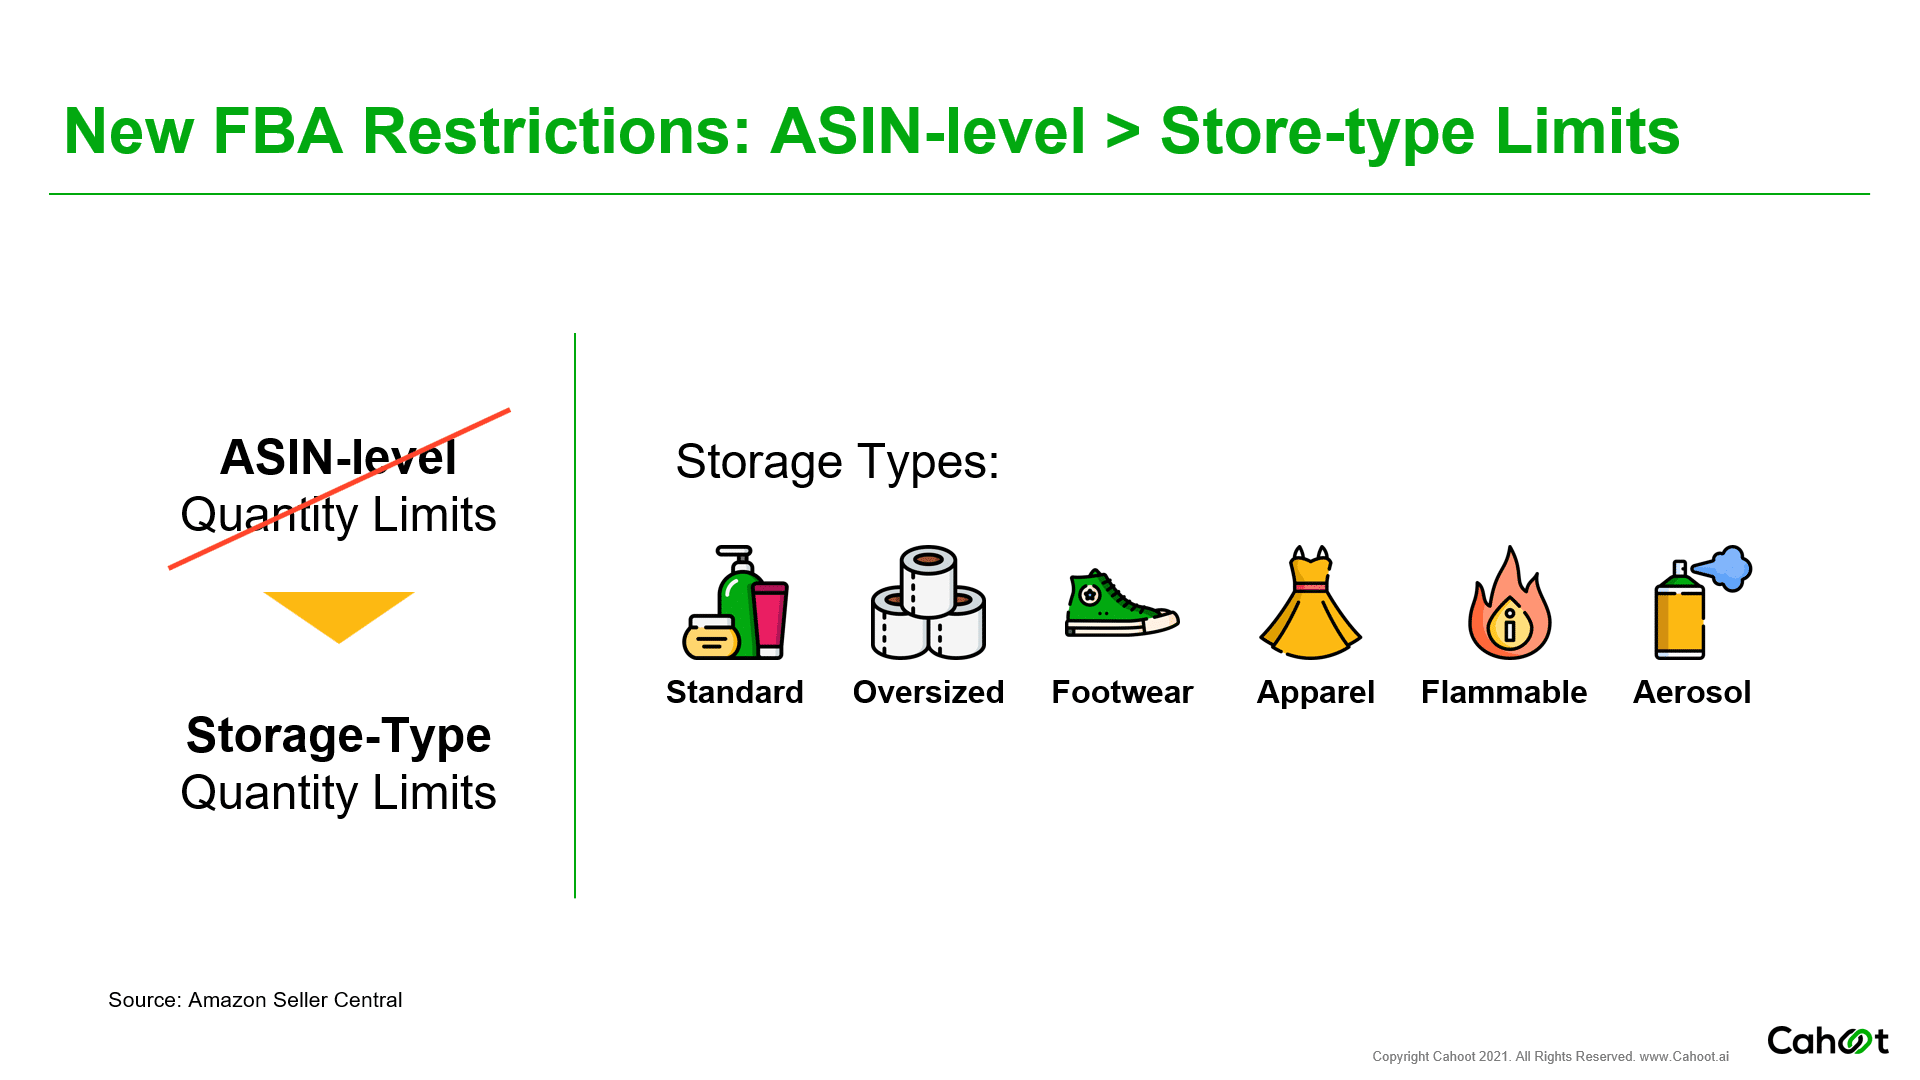 On April 22, 2021, Amazon FBA announced a change to quantity limits from ASIN-level to storage-type